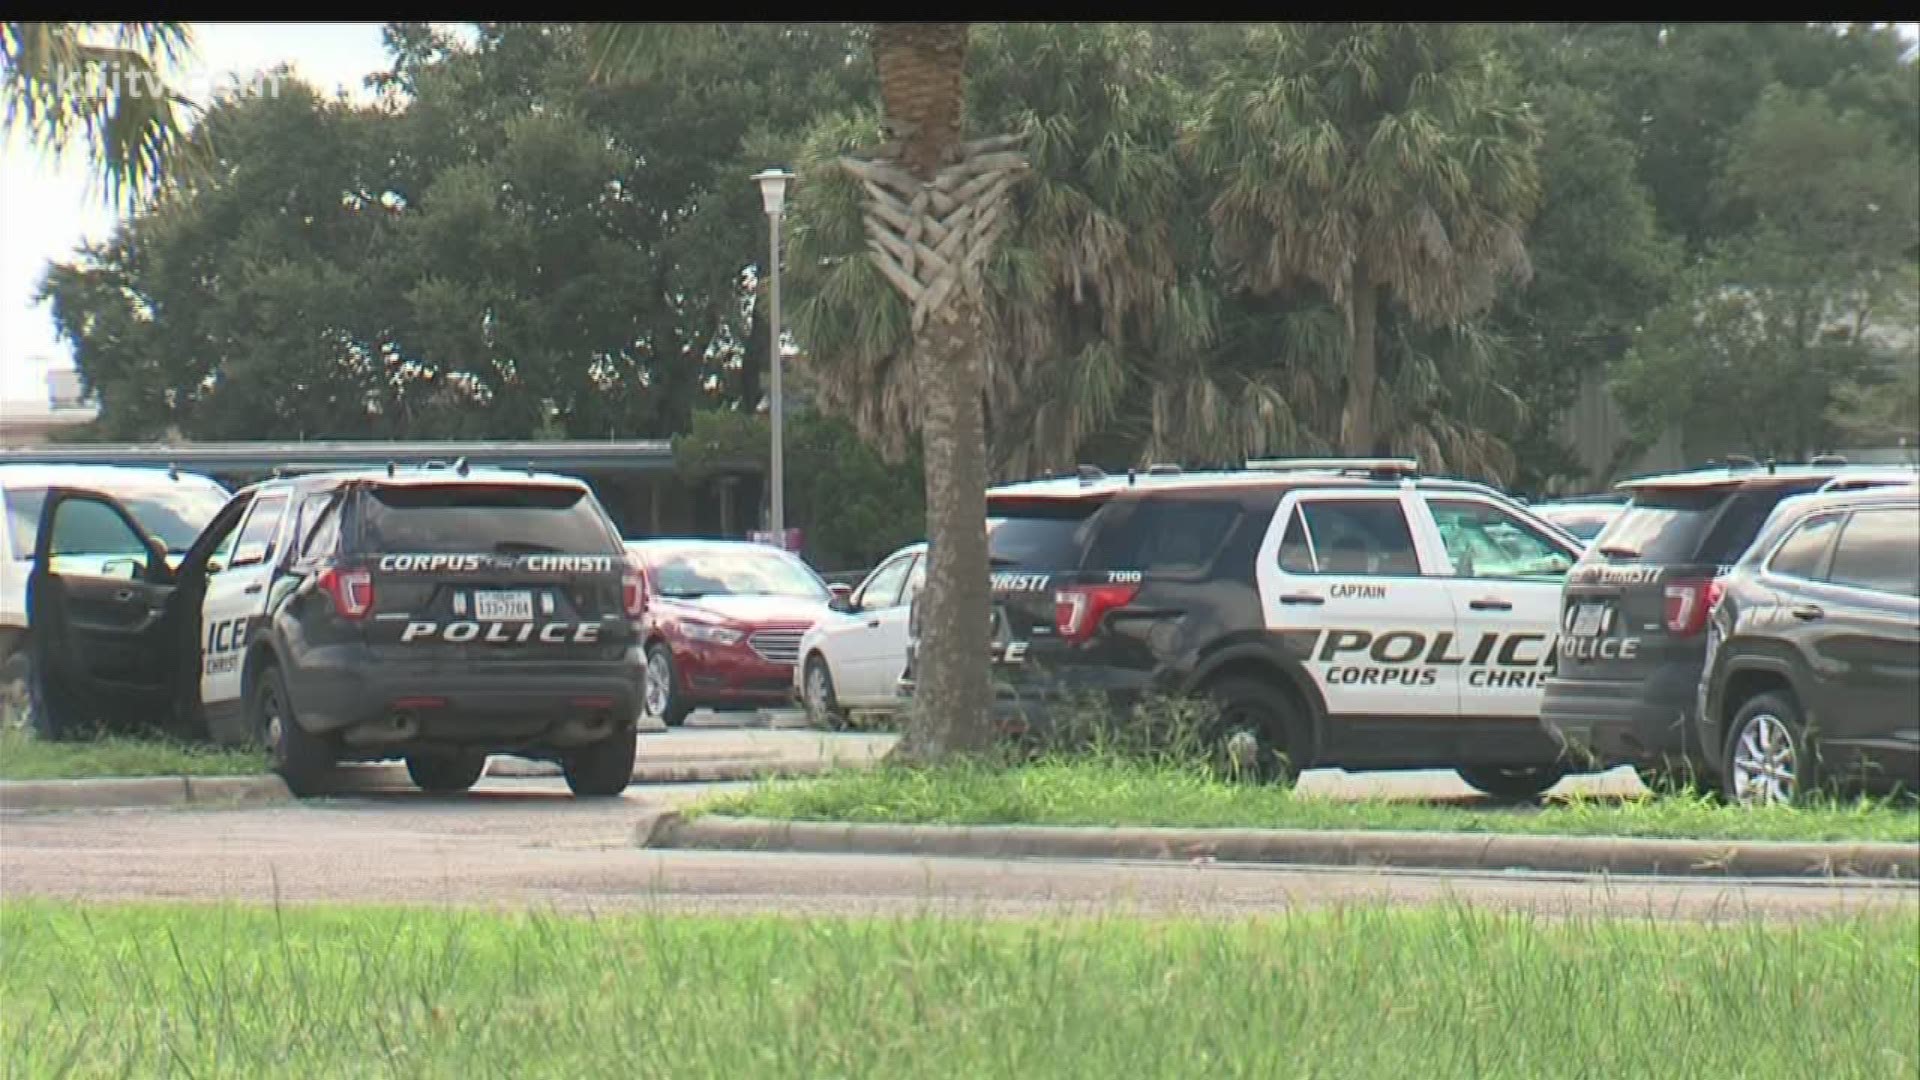 The incident happened right across from Calallen High School prompting a brief precautionary lockdown at the campus.